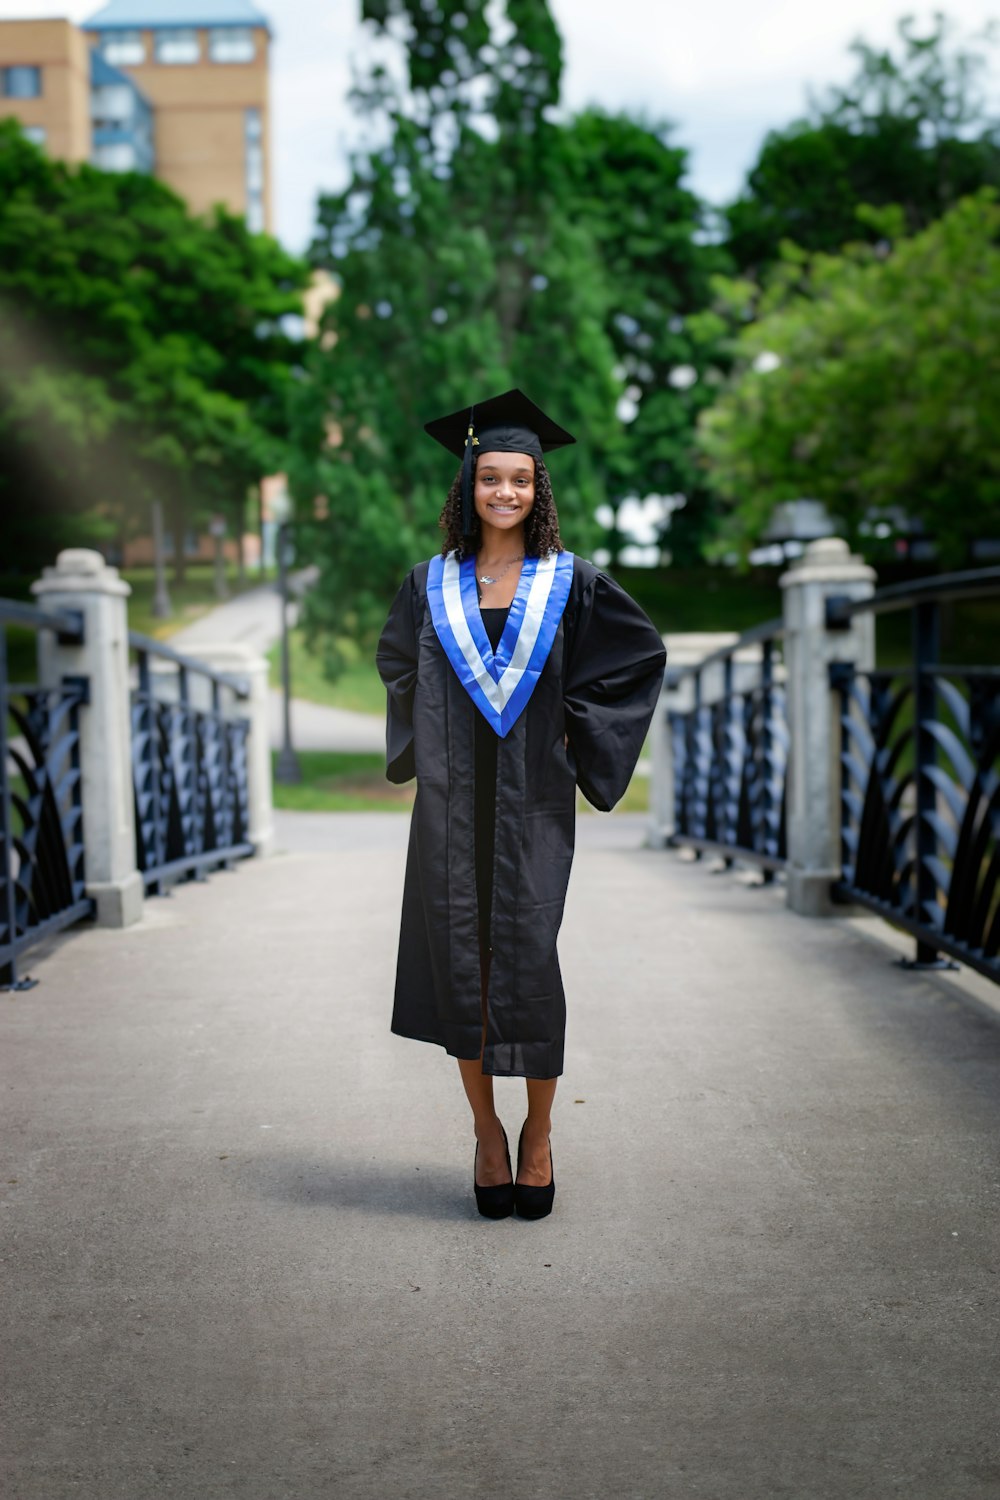 woman in black academic dress standing on gray concrete pathway during daytime